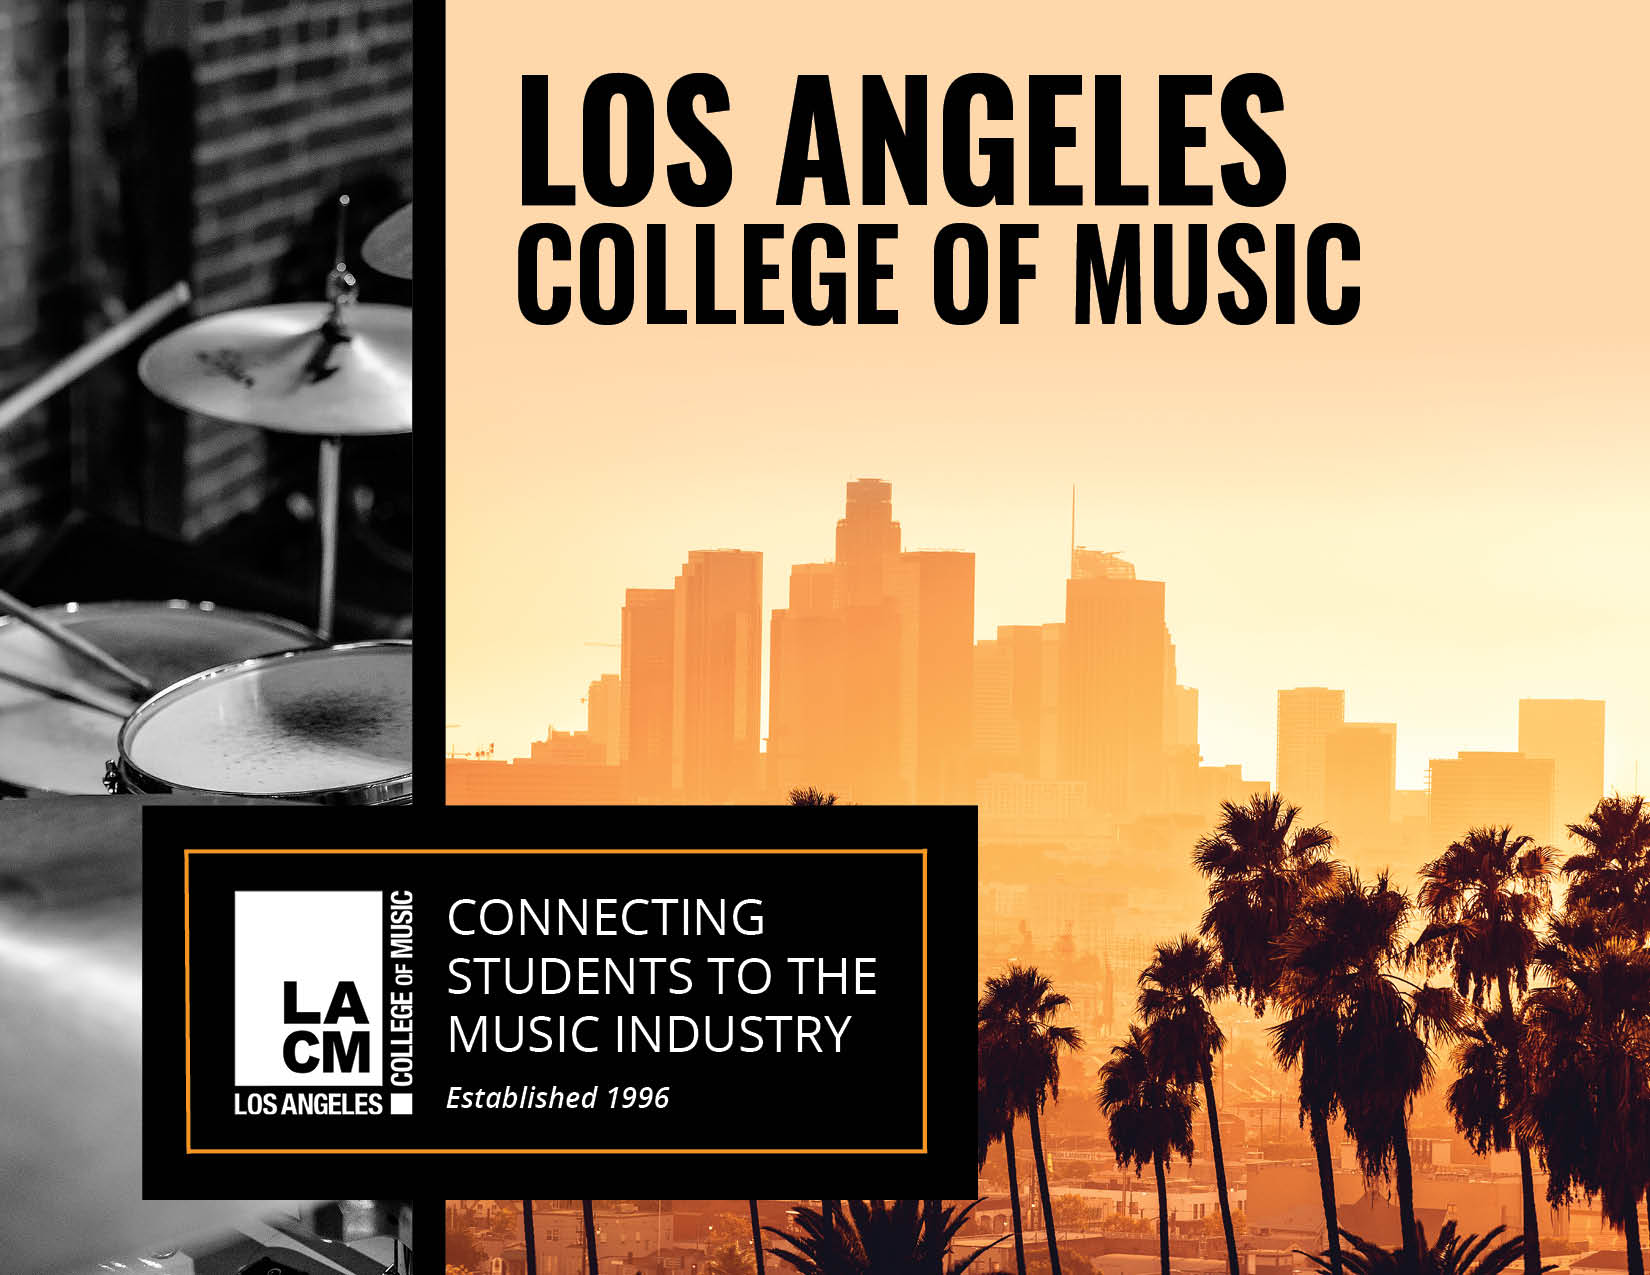 LACM: Los Angeles College of Music